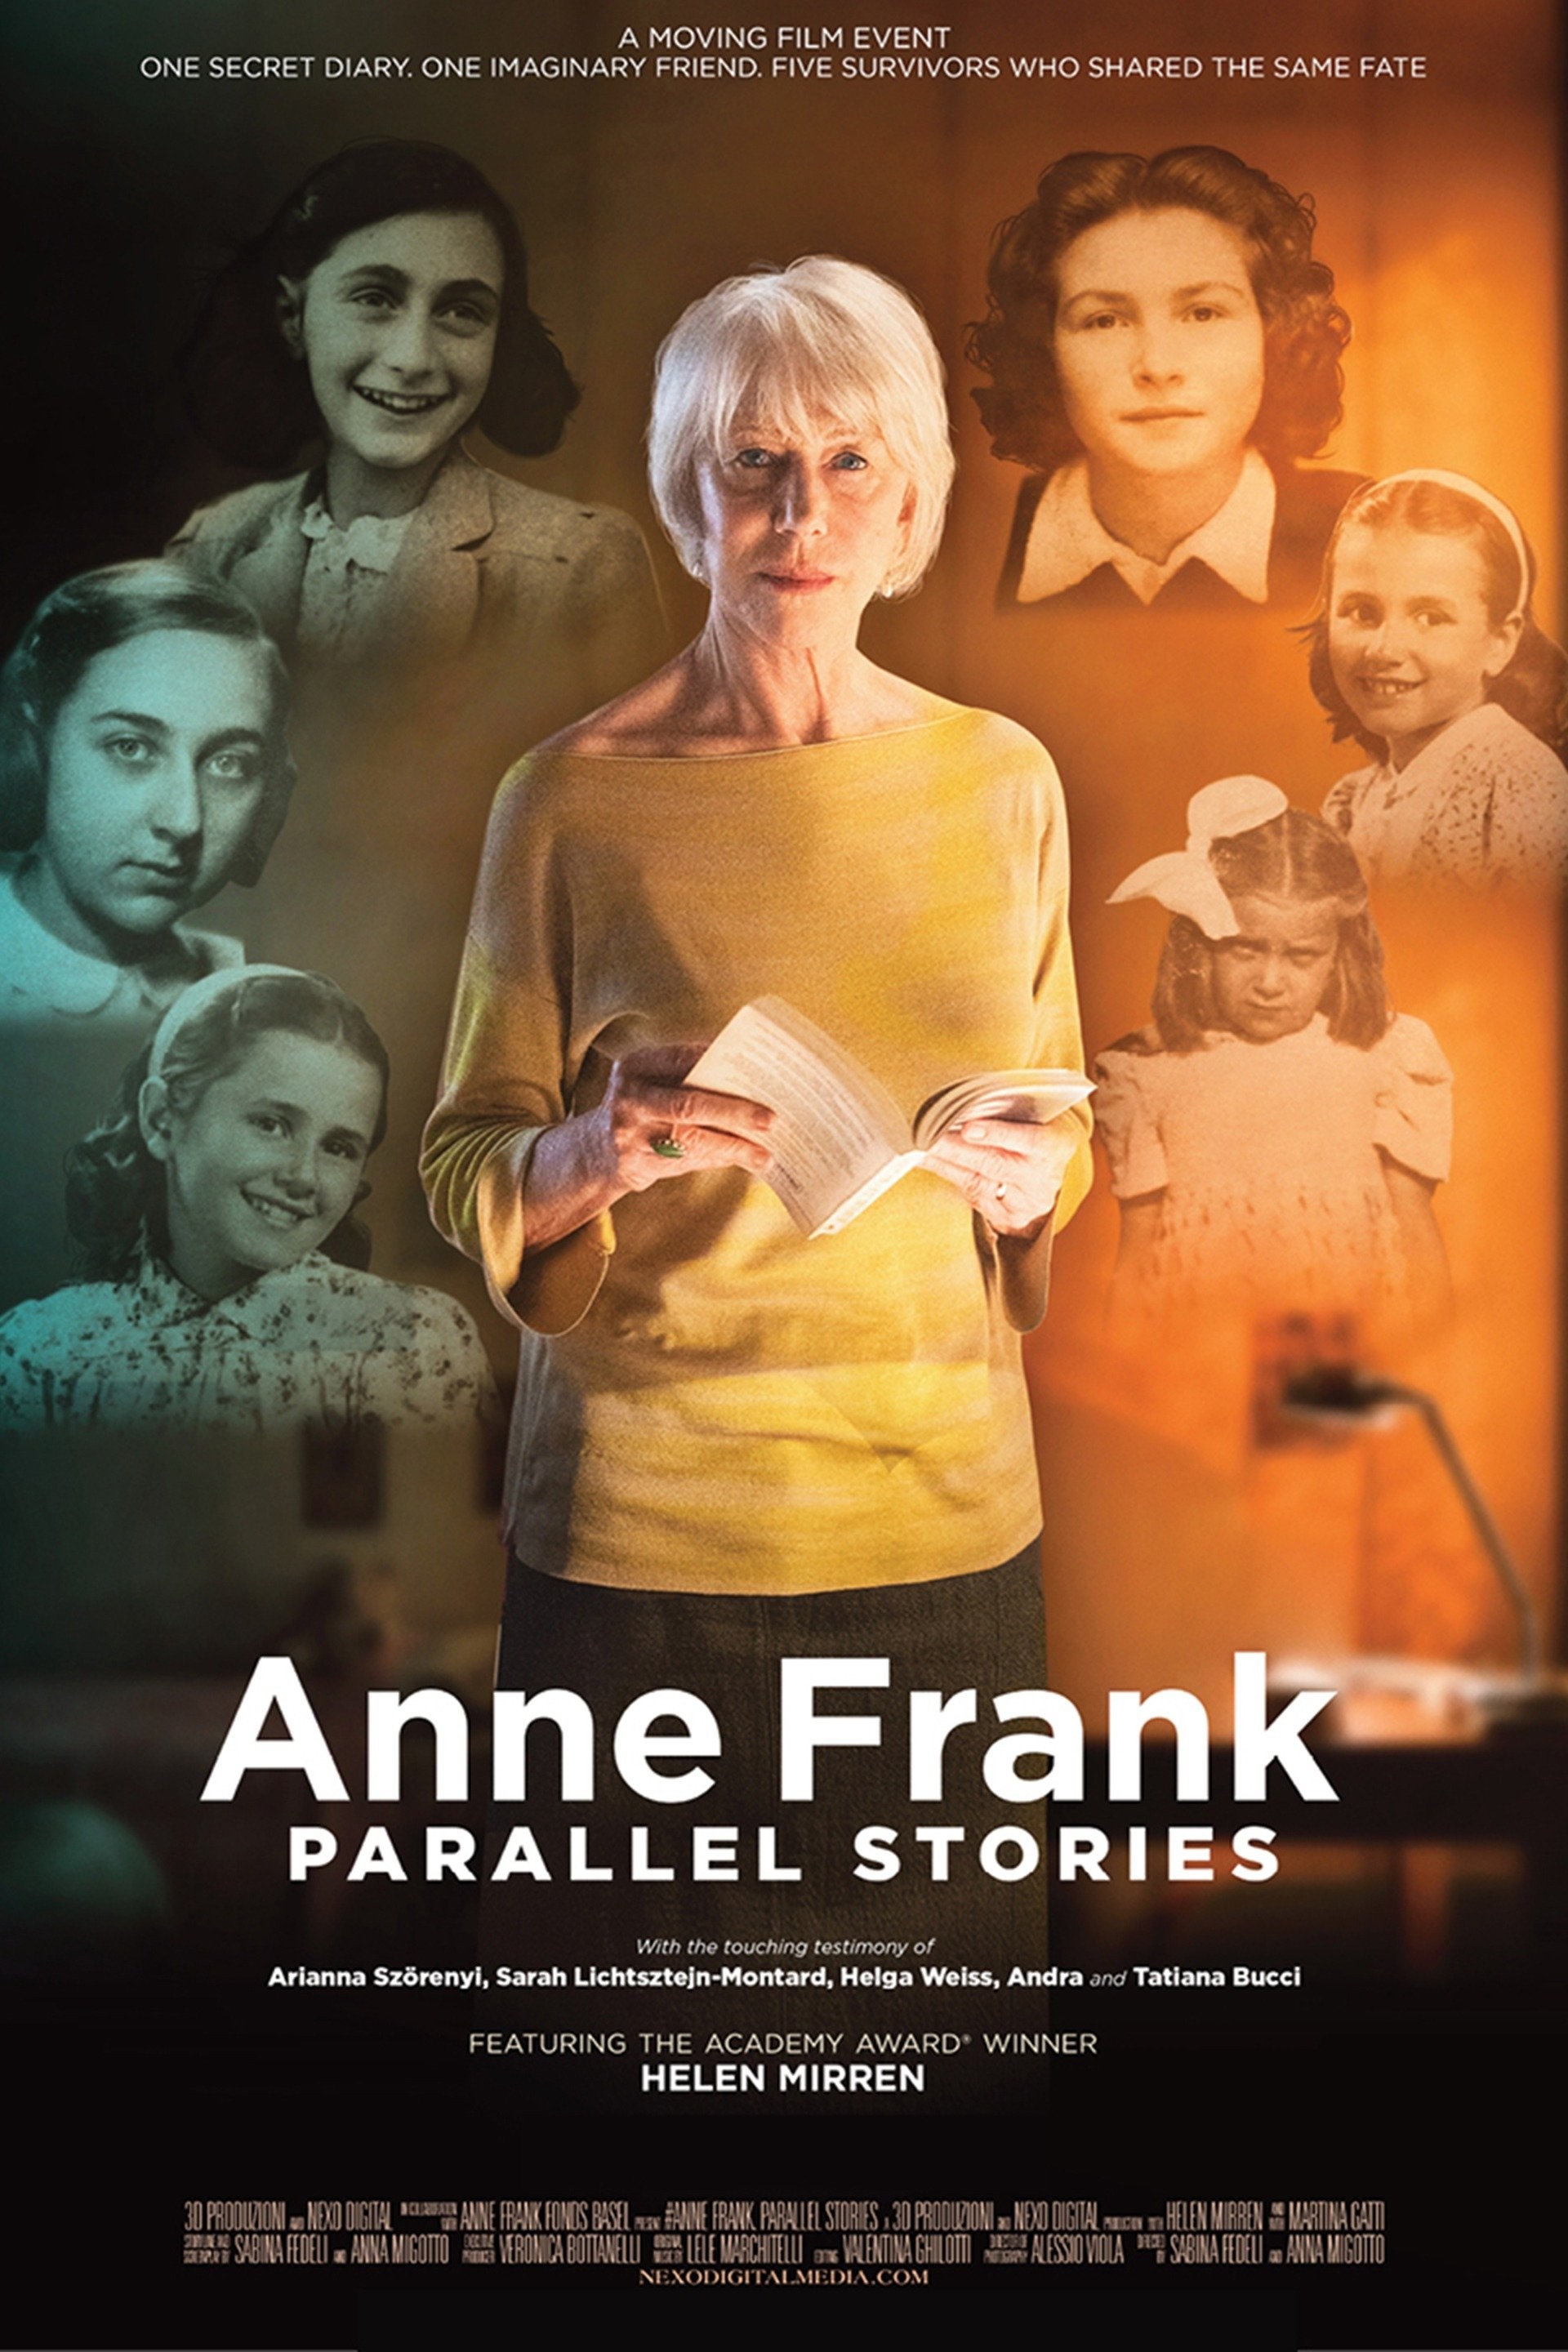 #AnneFrank. Parallel Stories | Rotten Tomatoes